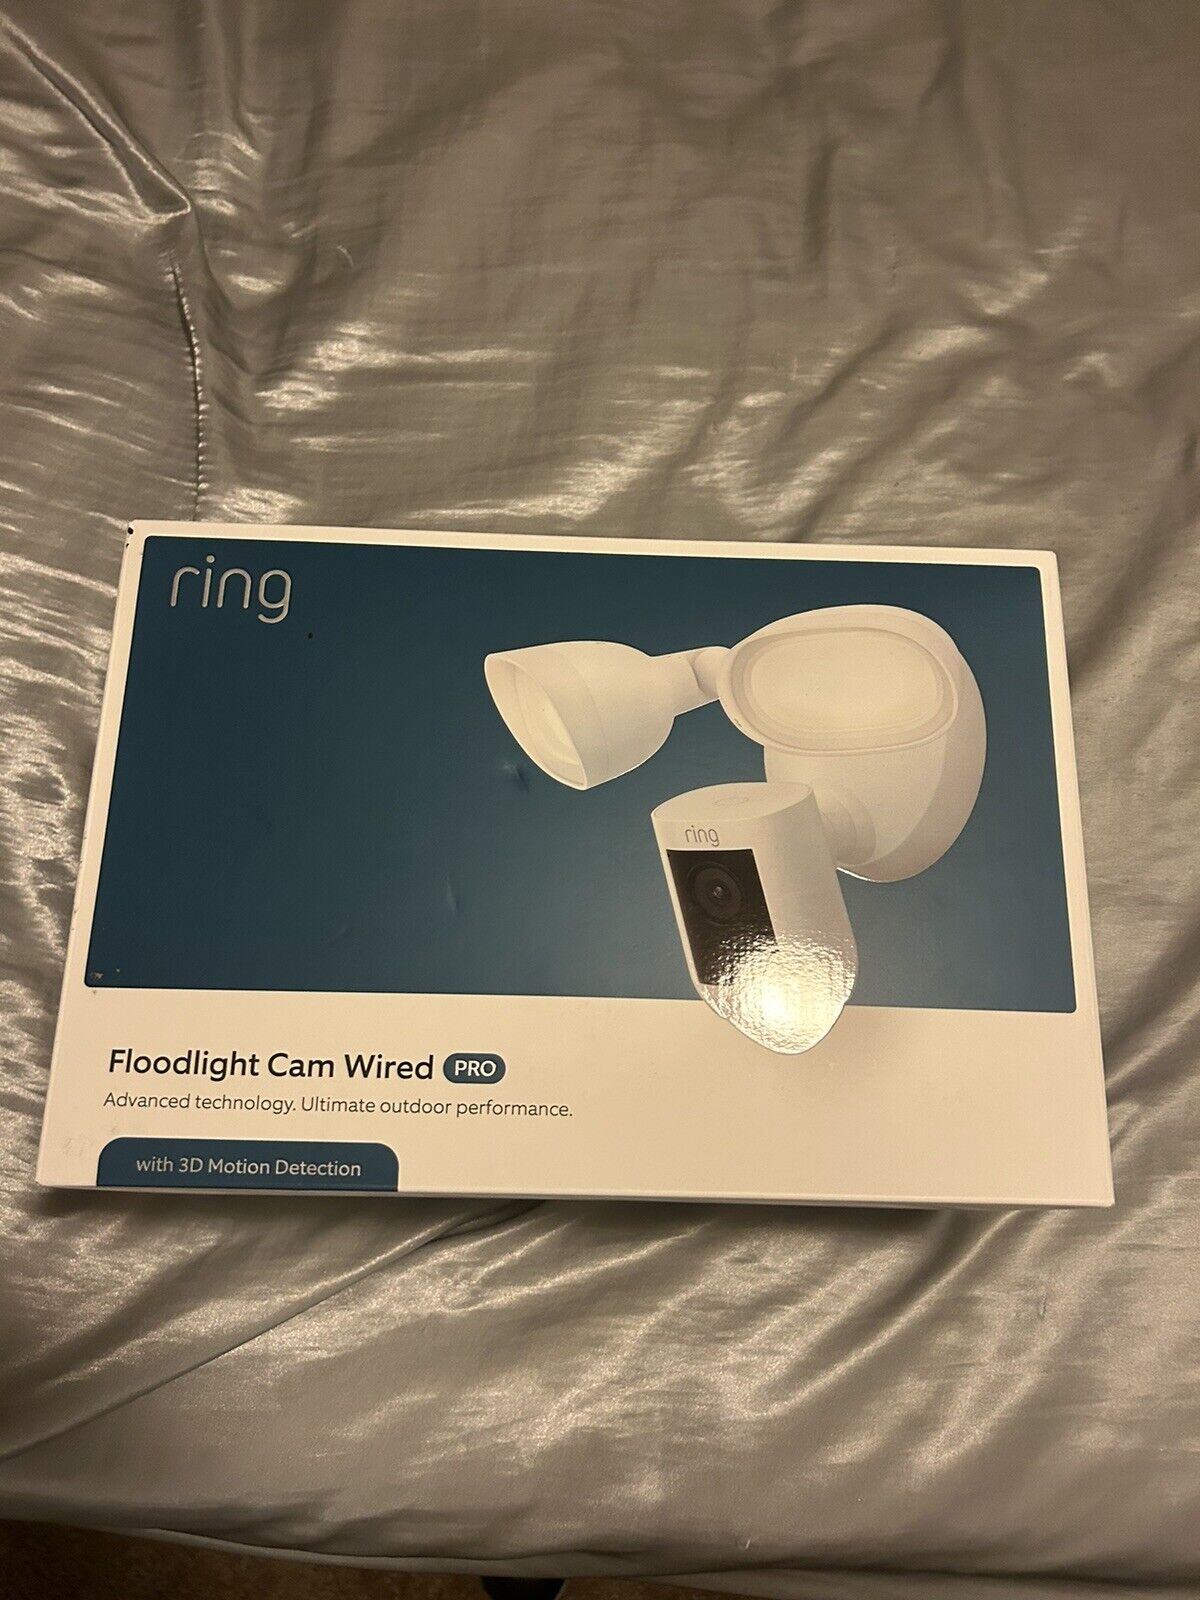 BRAND NEW Ring Floodlight Cam Wired Pro - White